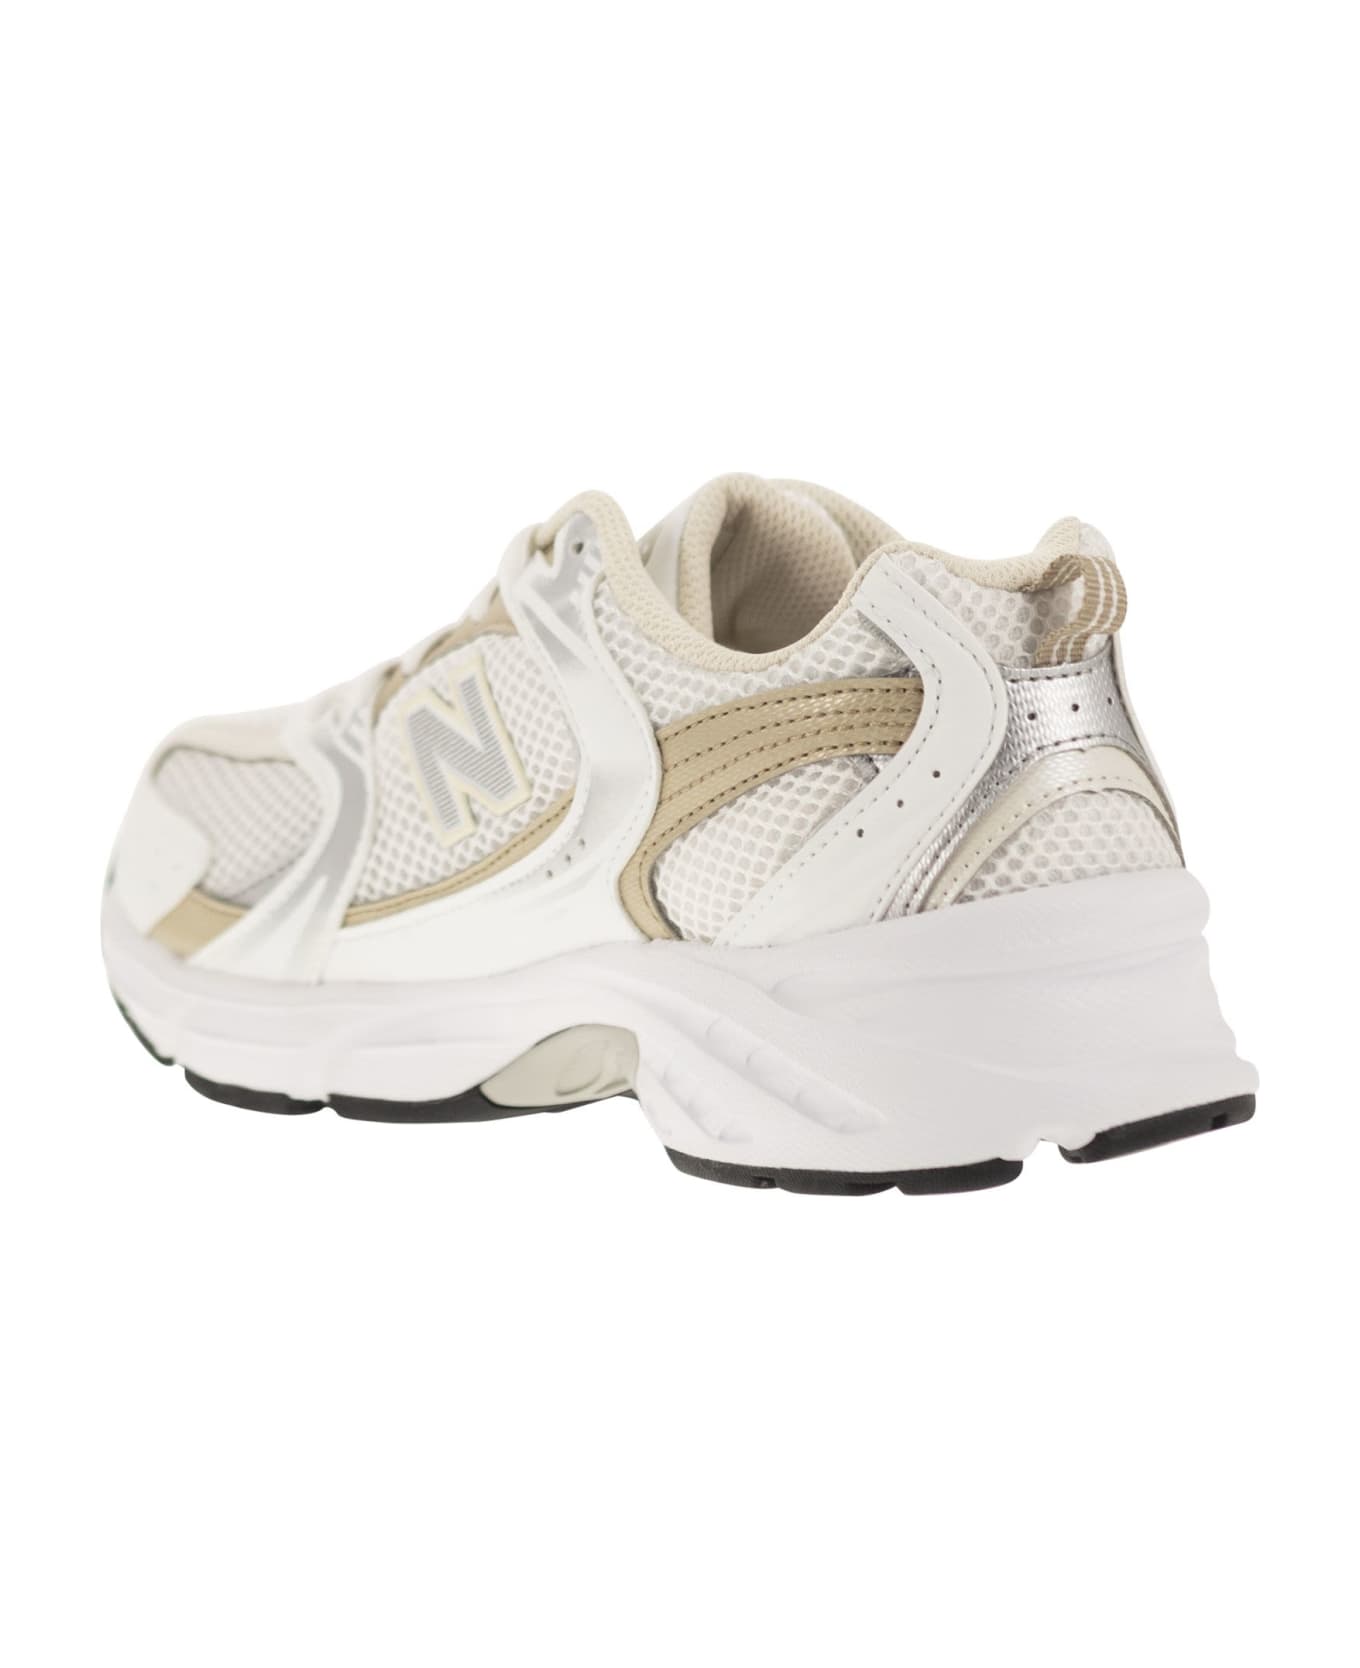 New Balance 530 - Sneakers Lifestyle - White/beige